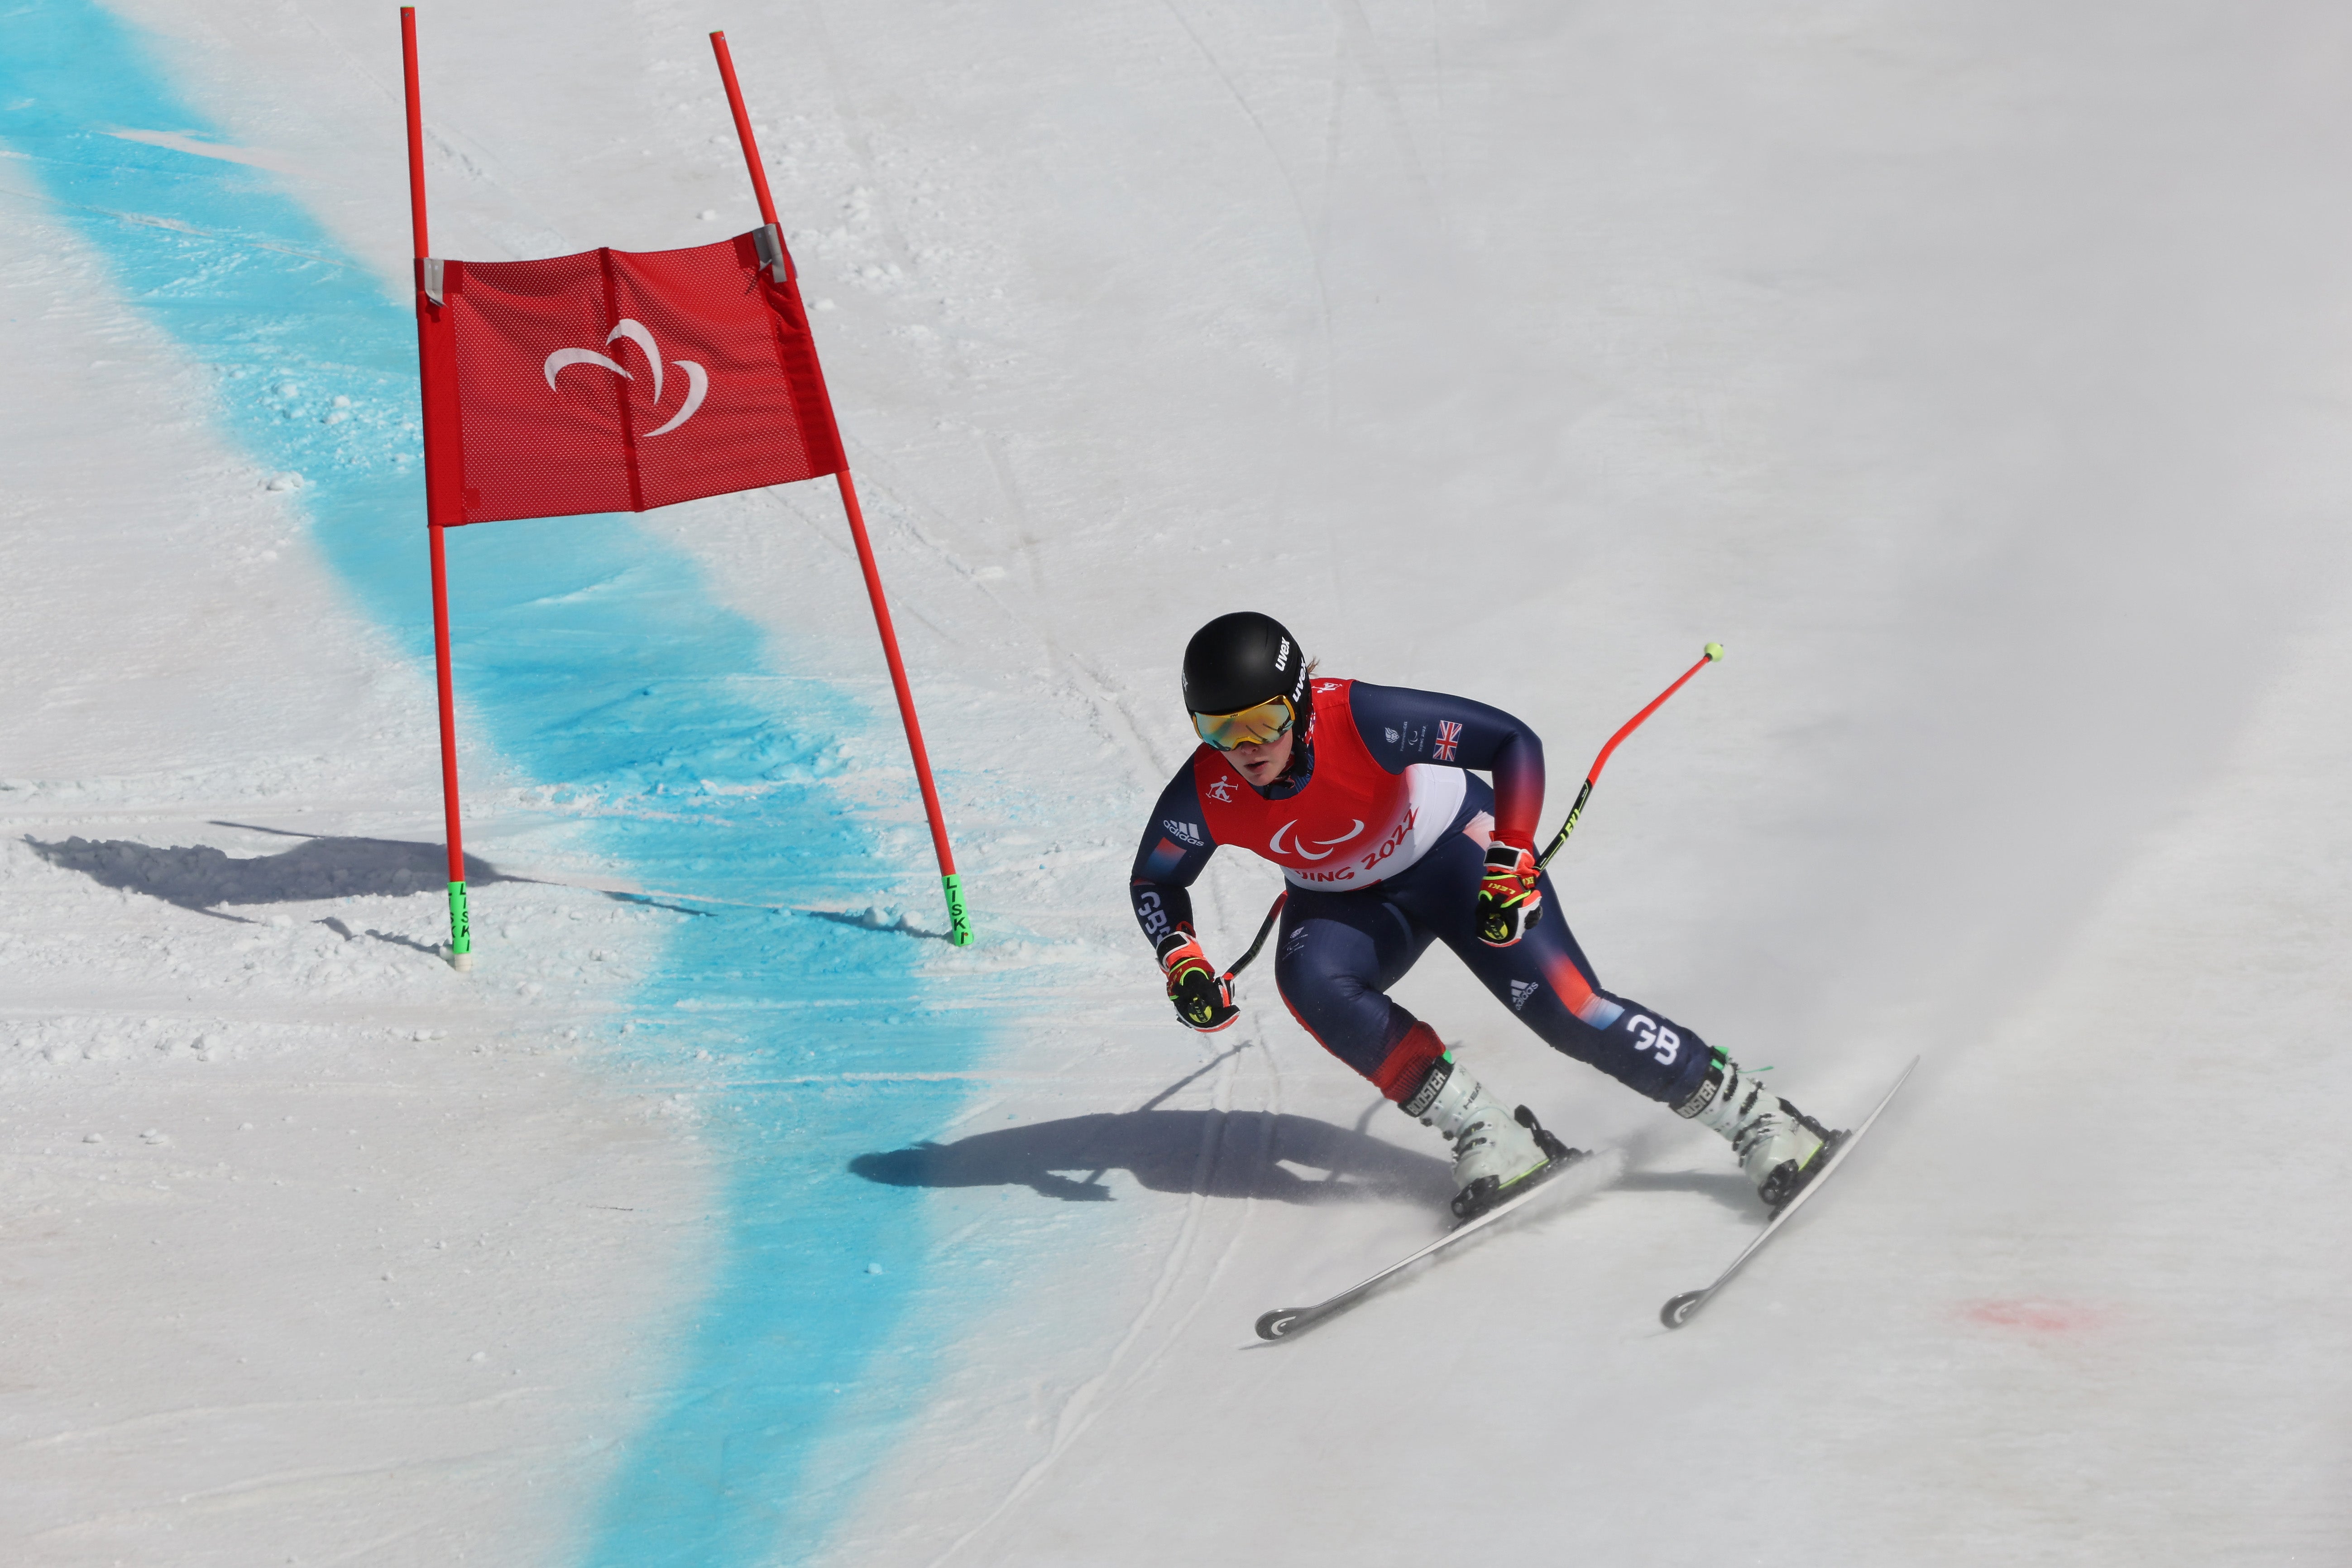 Millie Knight was disappointed not to win a second medal of the 2022 Winter Paralympics in the super-G